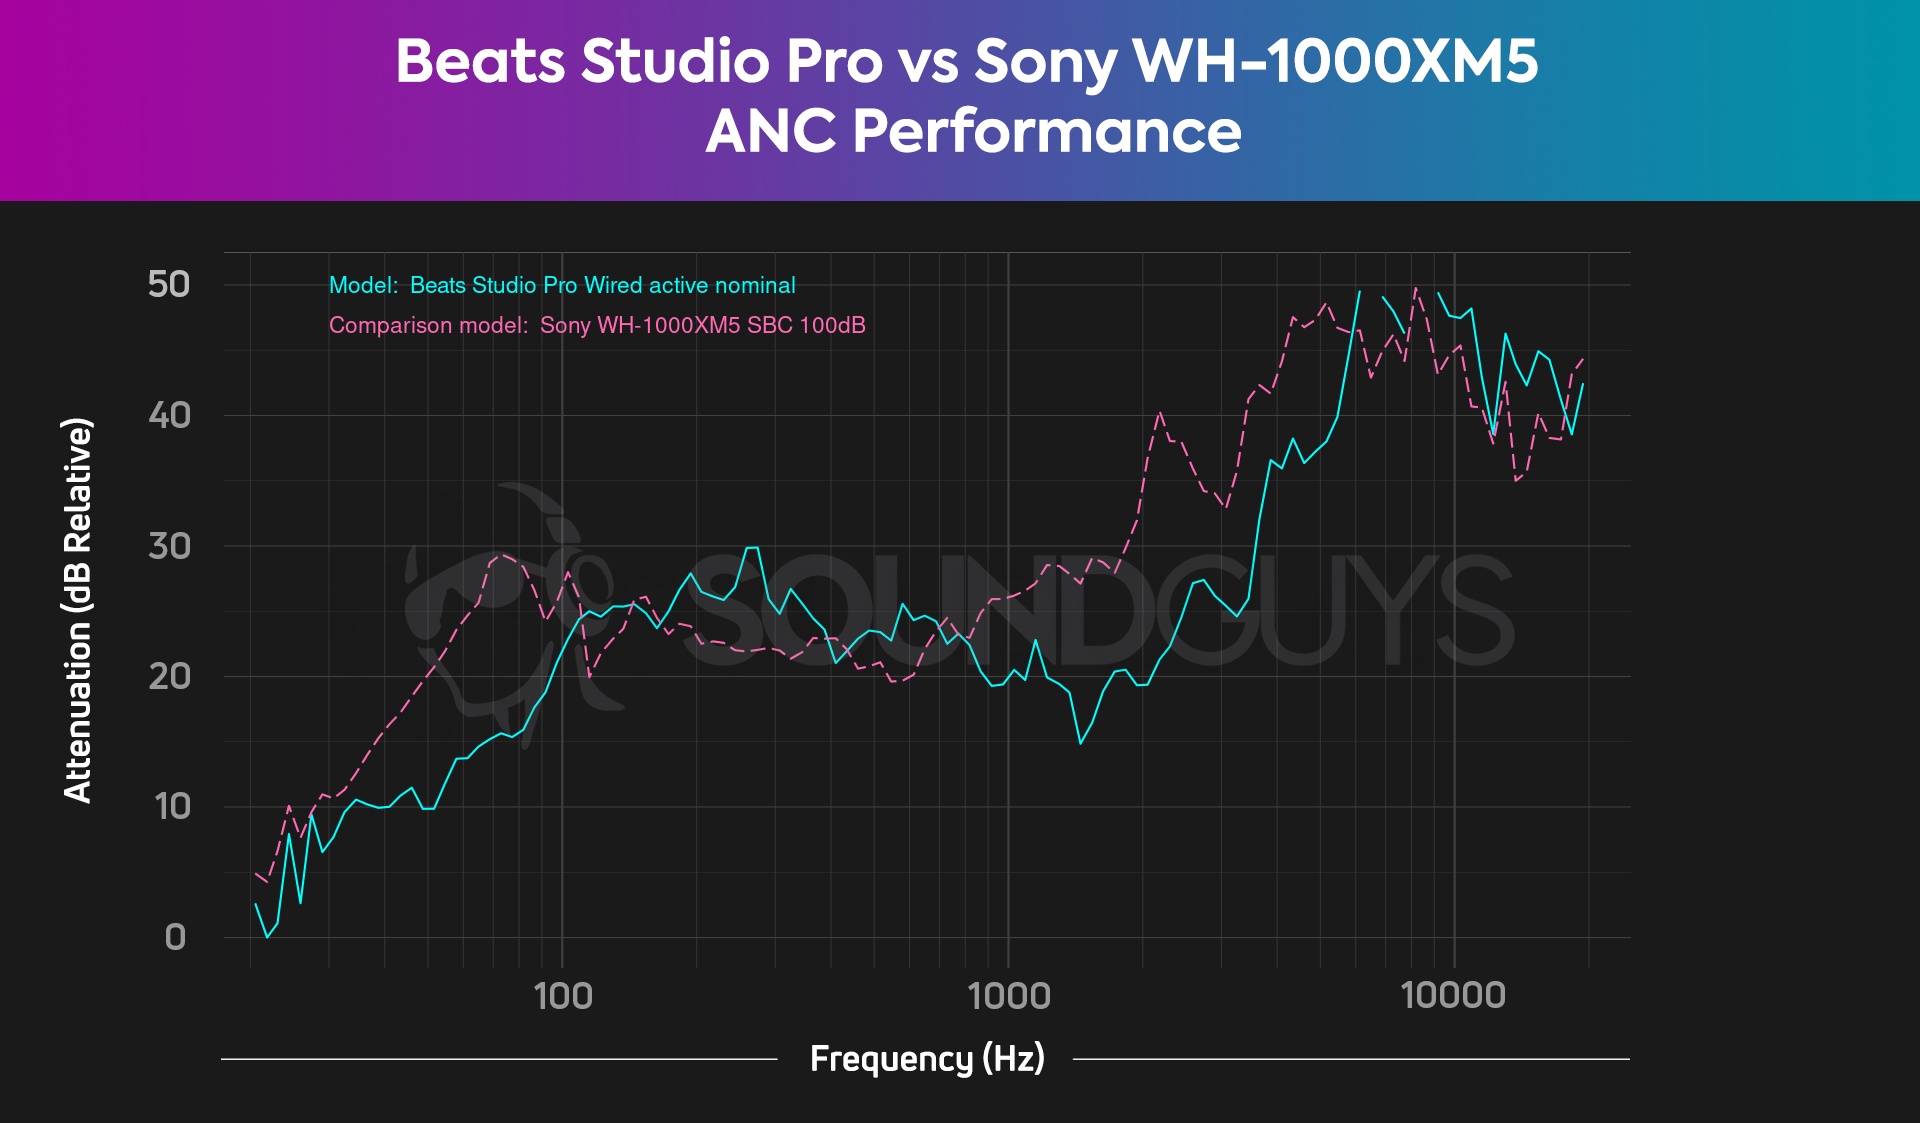 A chart comparing the somewhat poorer ANC performance of the Beats Studio Pro against the Sony WH-1000XM5.